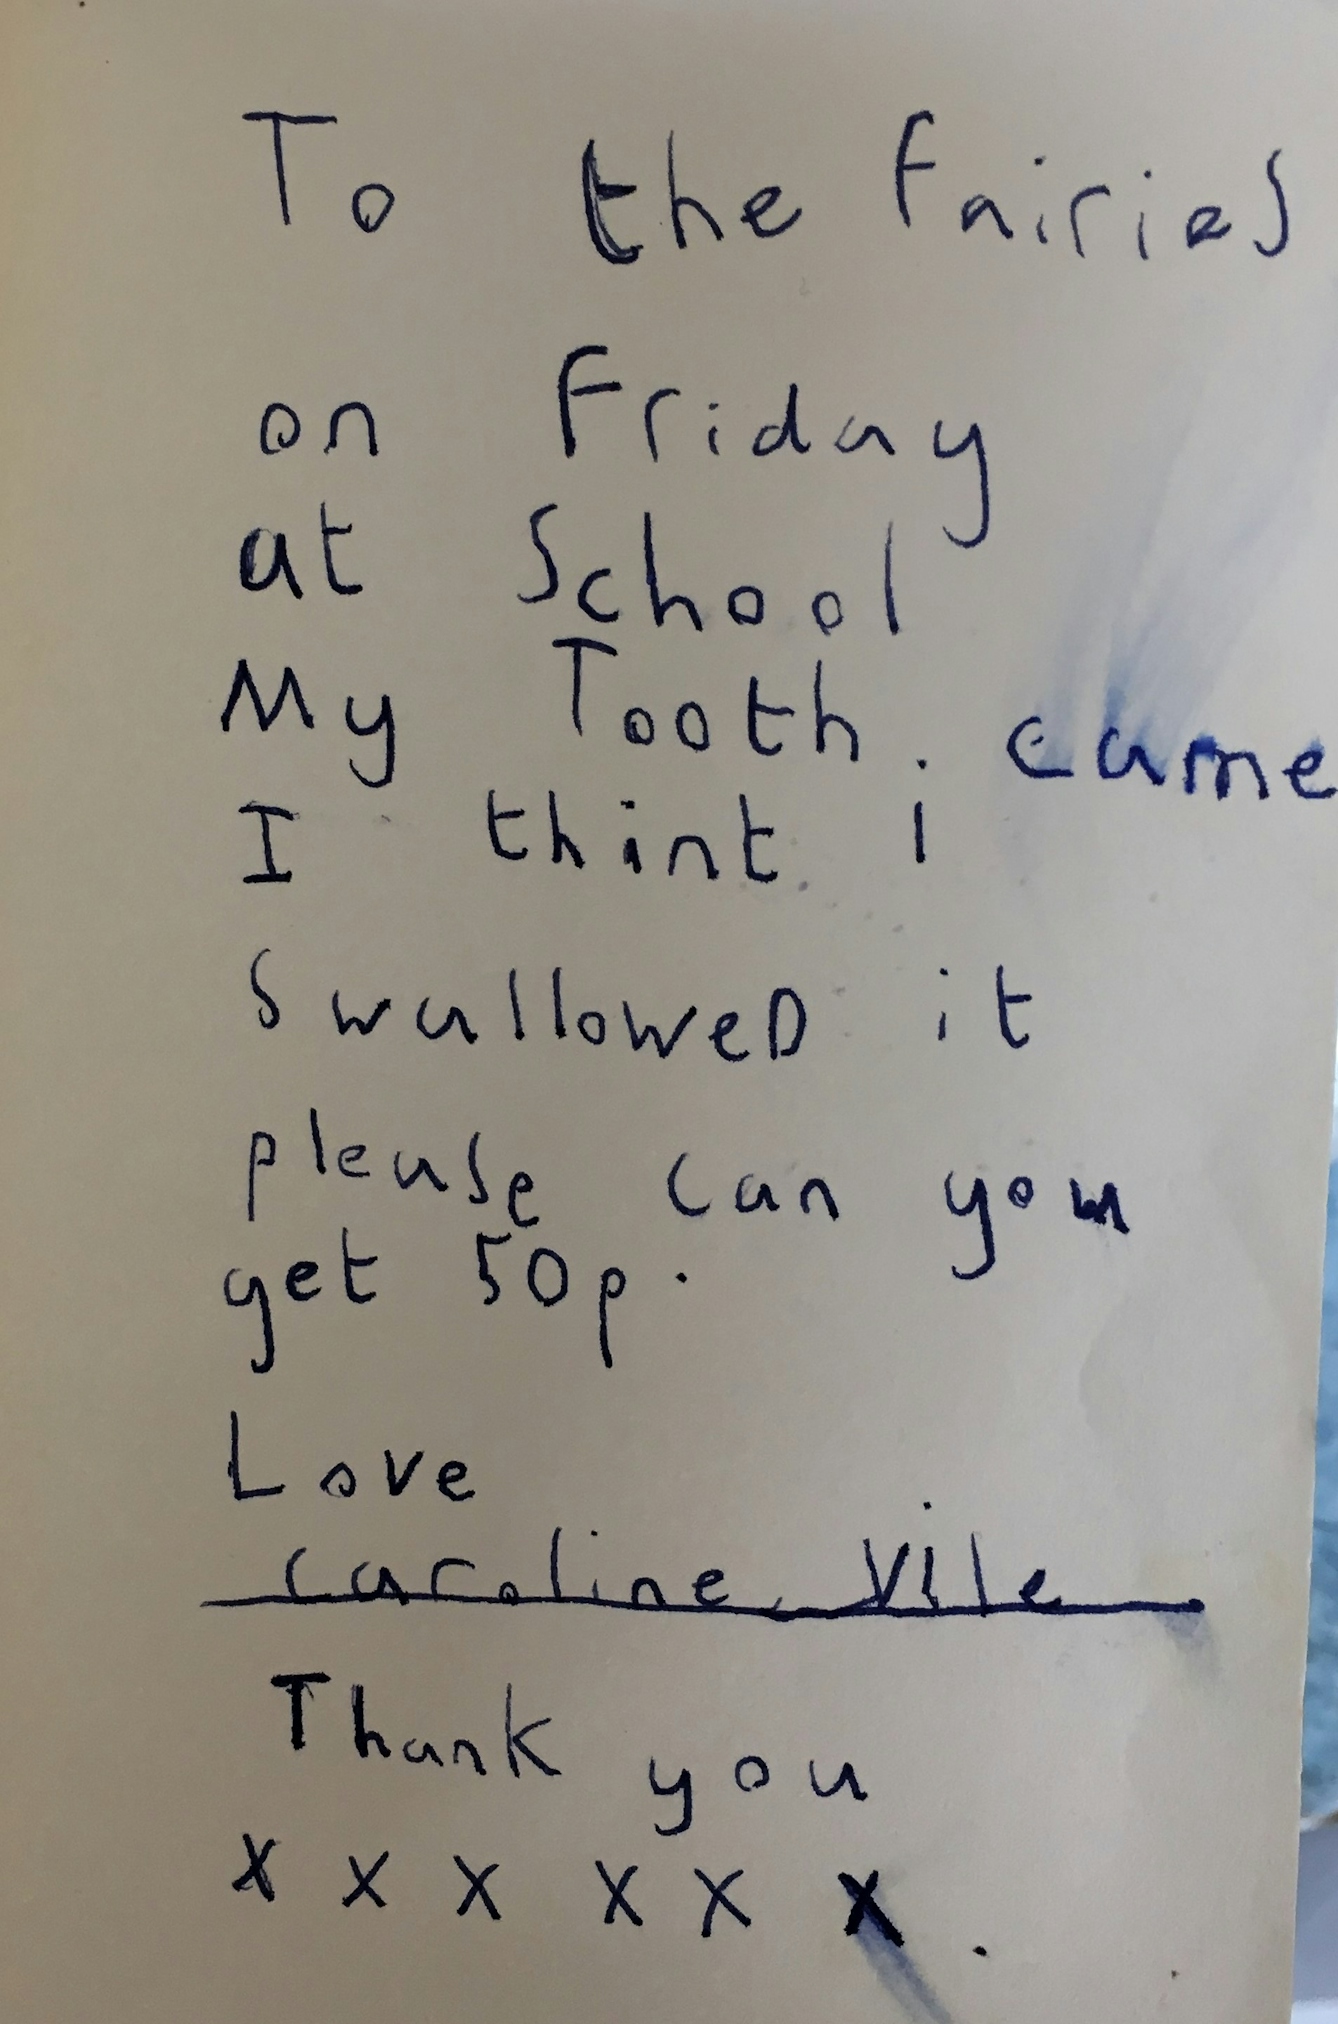 Letter written in blue ink on plain white paper. Reads: To the fairies. On Friday at school my tooth came. I think I swallowed it. Please can you get 50p. Love, Caroline Vile. Thank you. XXXXXX